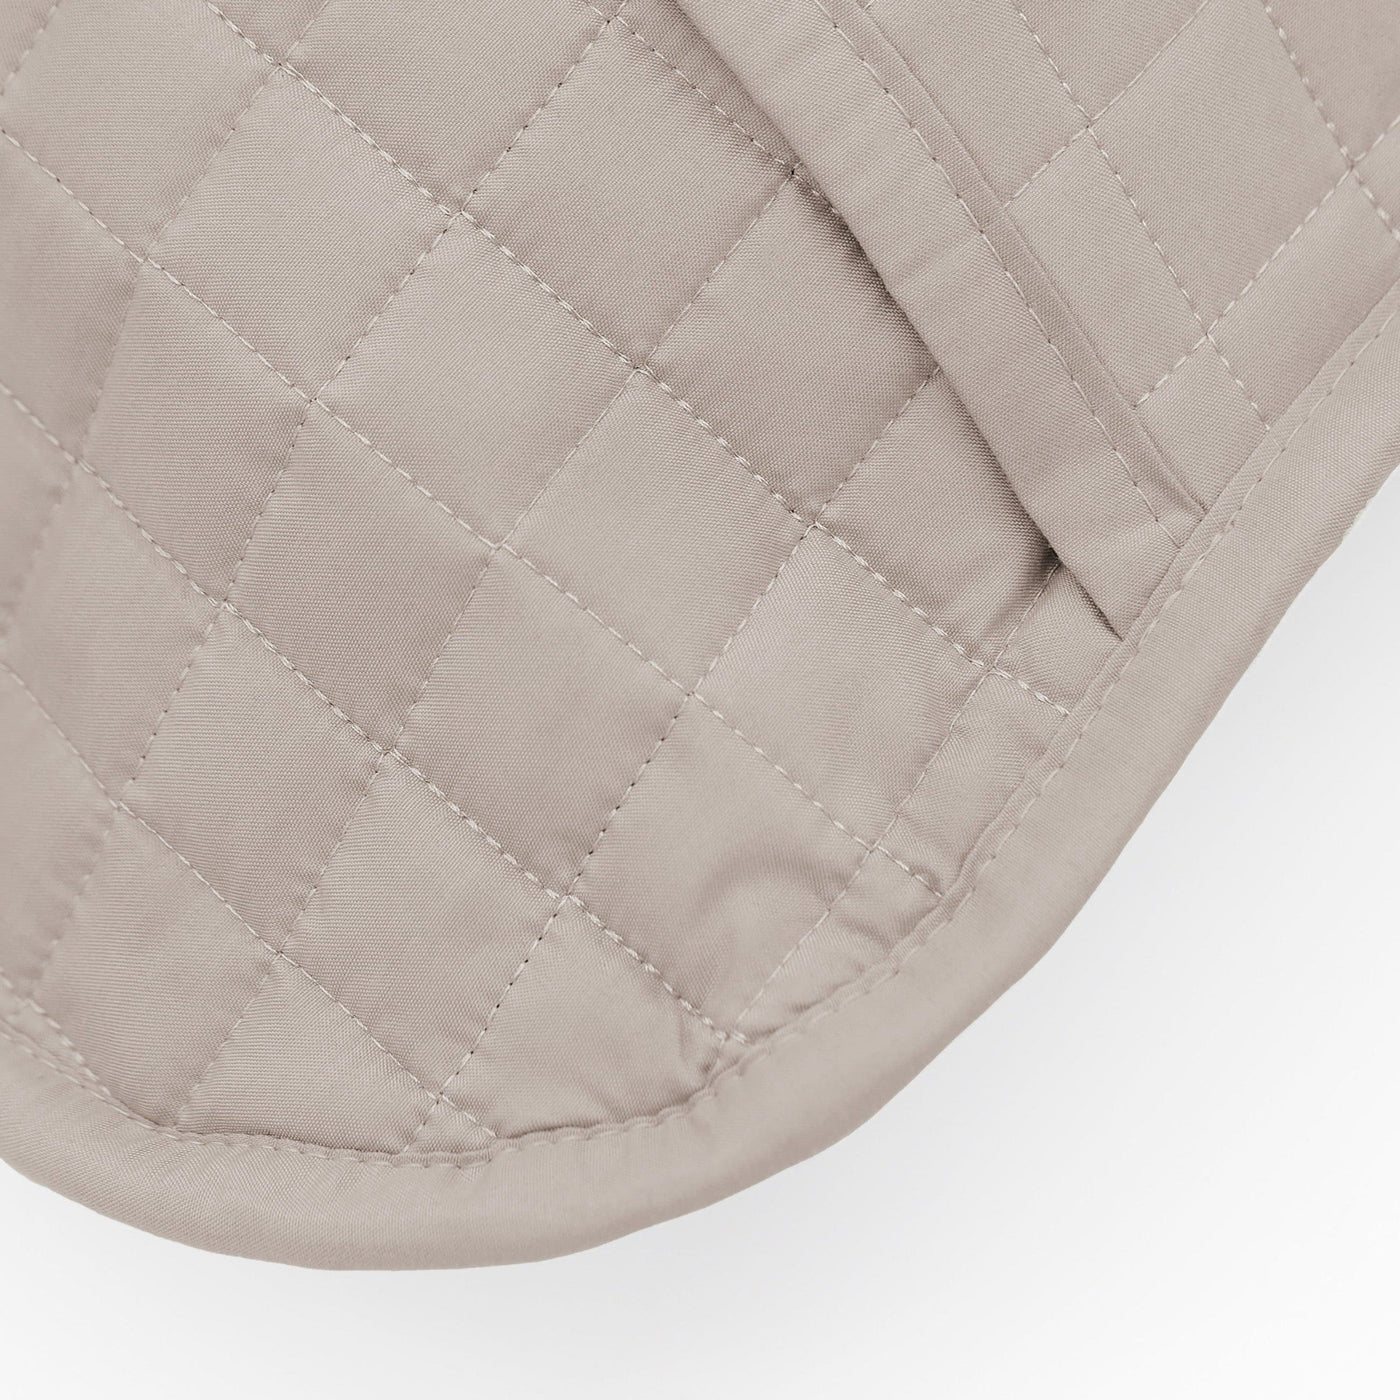 Details and Texture of Vilano Quilted Sham and Pillow Covers in Bone#color_vilano-bone